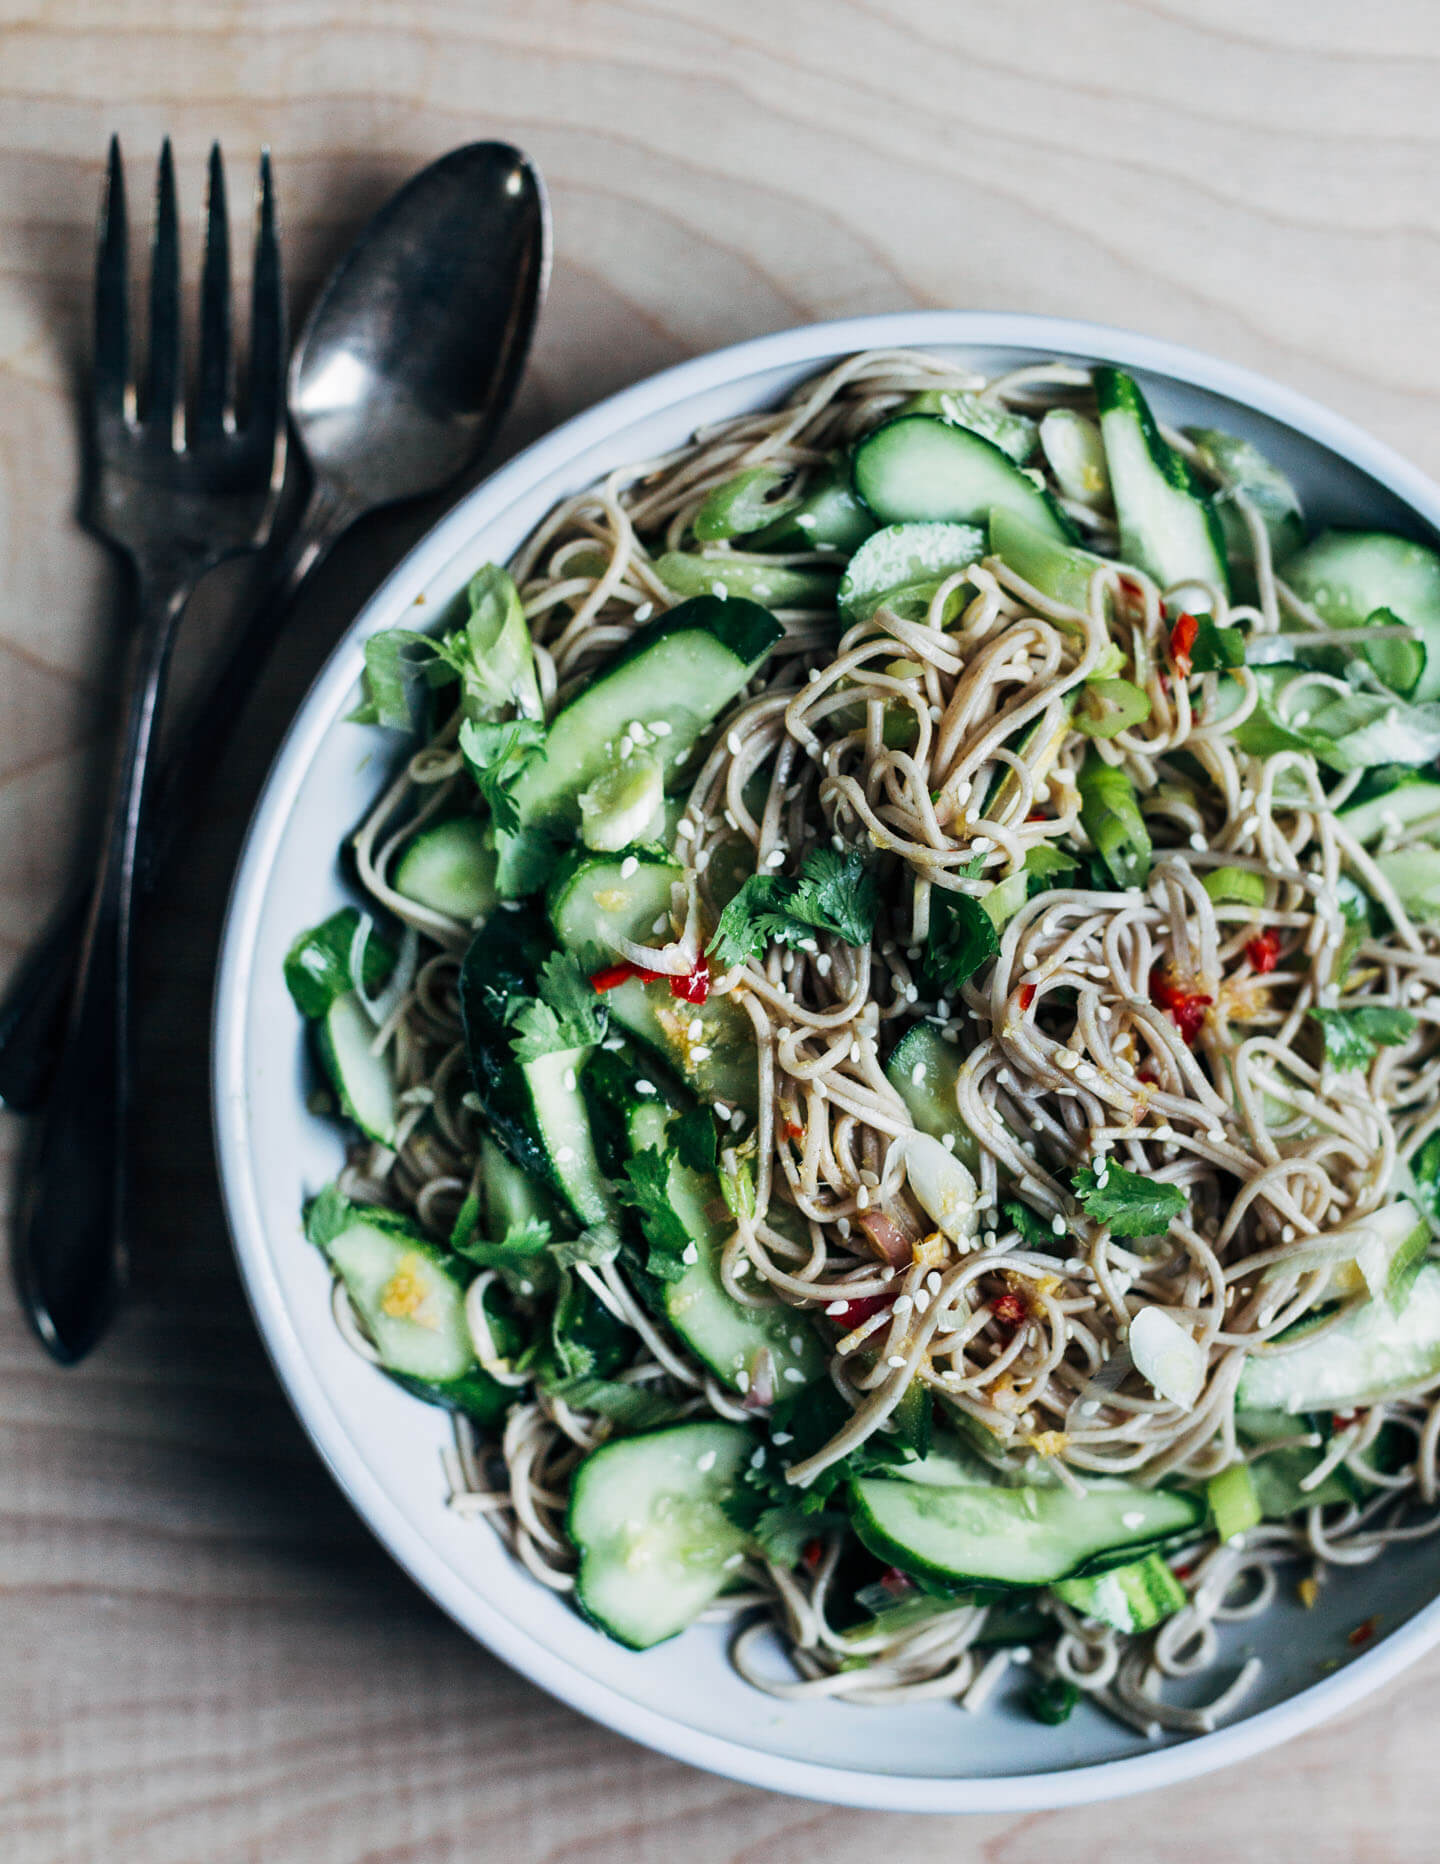 The perfect meal for hot summer days – cold cucumber soba noodles with a sweet chili sauce. Made with nutty buckwheat soba noodles with a super flavorful sweet chili and ginger sauce, quick-pickled cucumbers, and green onions.